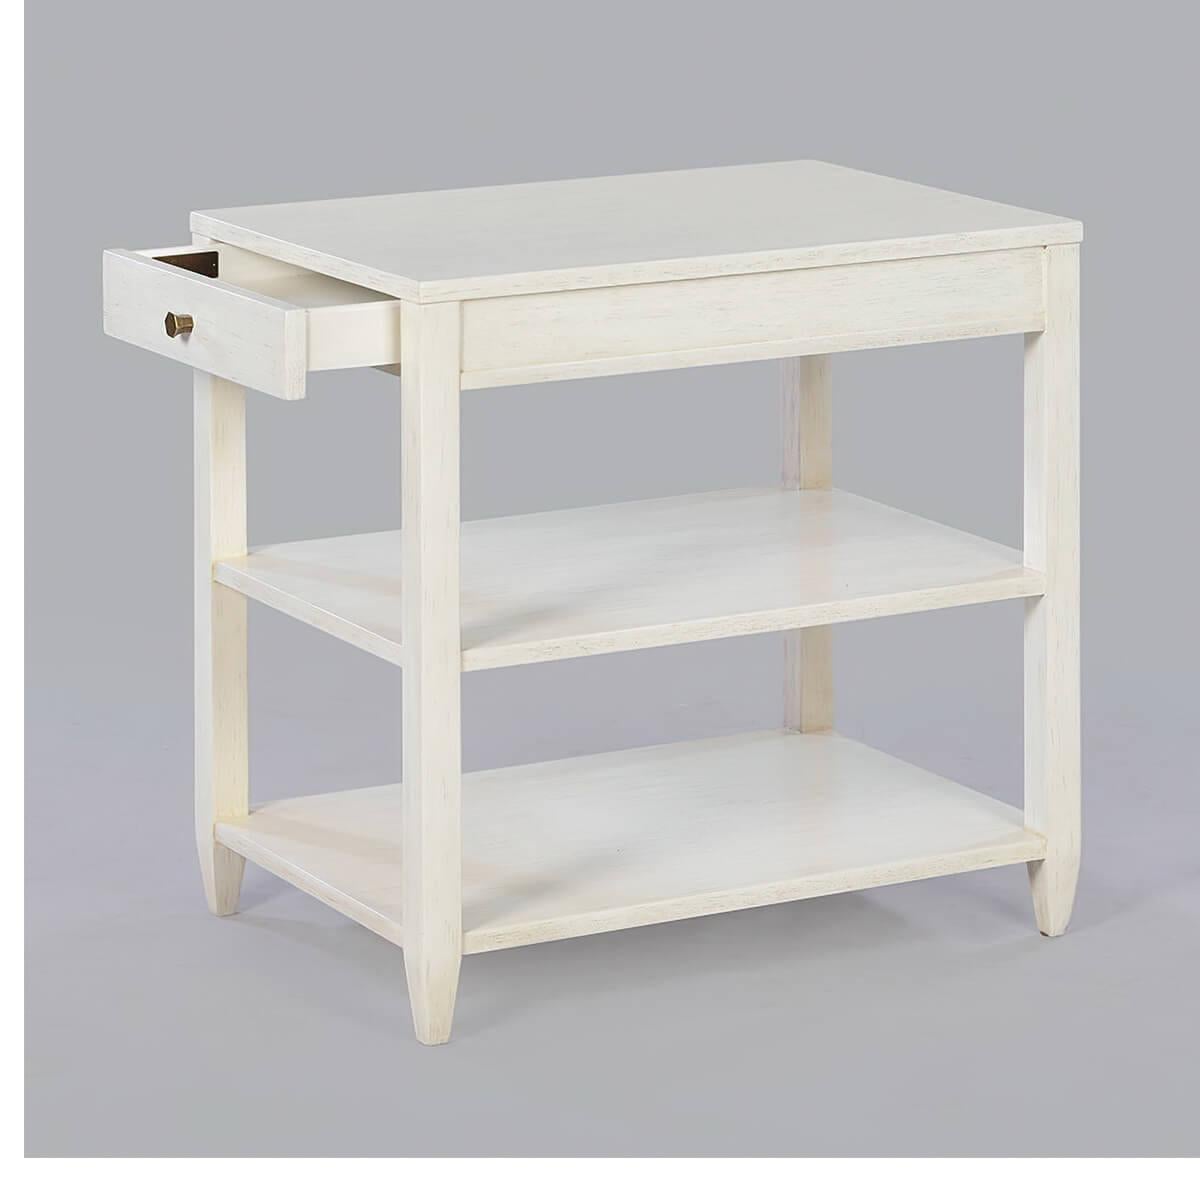 Classic narrow rectangle side table with a drawer, two shelves, brass hardware, and tapered teen, has a “drift” white painted finish with a subtle grey distressing and hand-rubbed finish.

Dimensions: 26